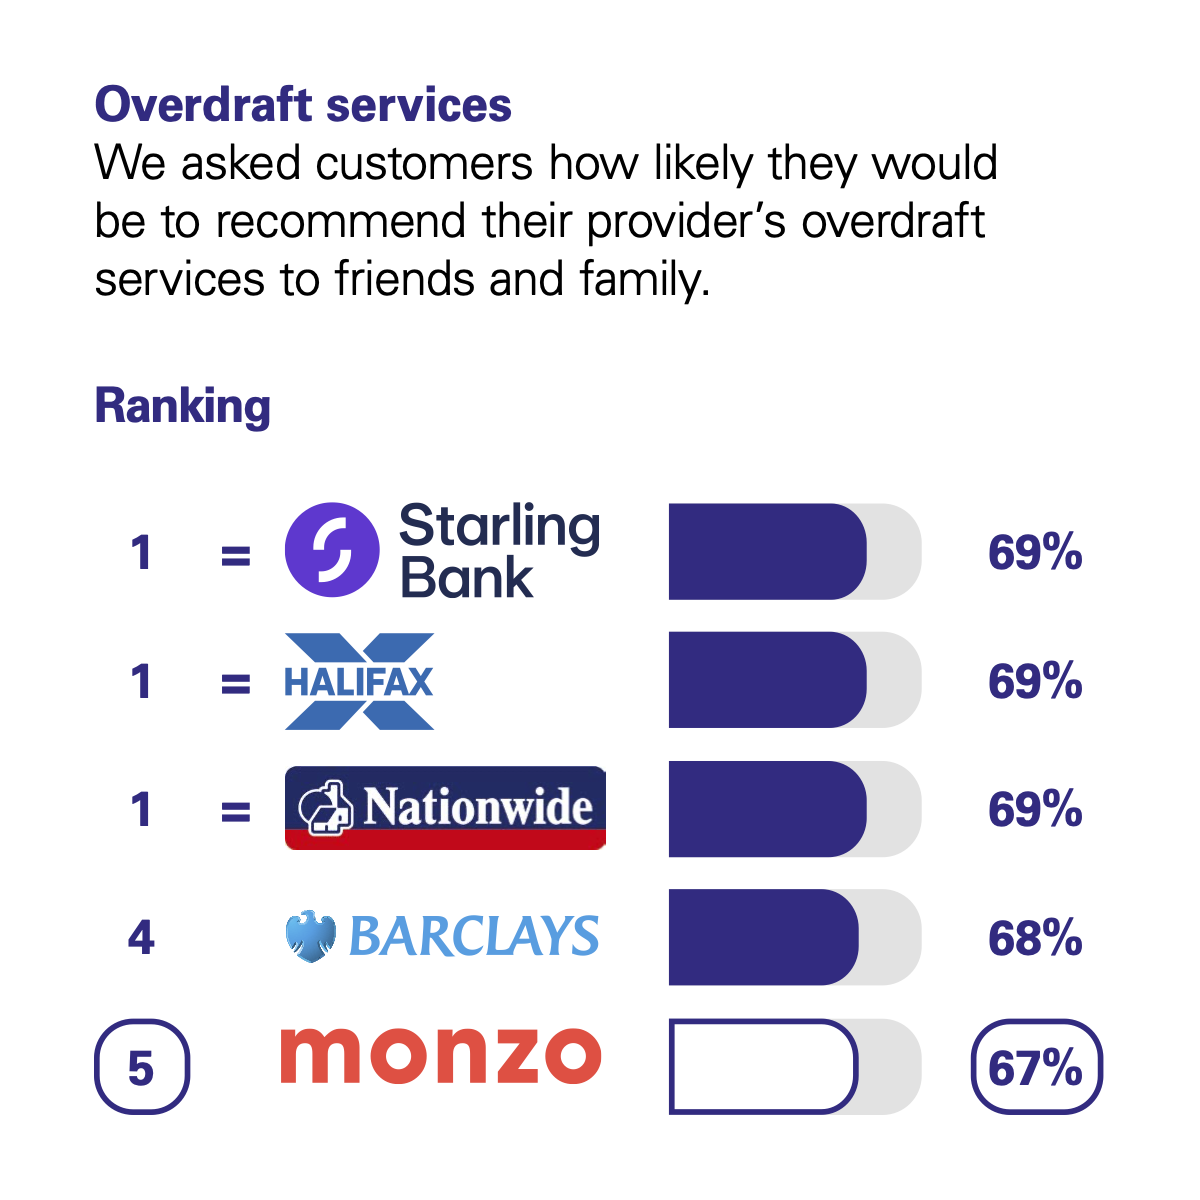 Graph showing the results of the CMA scoring of UK banks in the Overdraft Services category. The CMA asked customers how likely they would be to recommend their provider's overdraft services to friends and family. The rankings with percentage scores are: Joint 1st are Starling Bank with 69%, Halifax with 69% and Nationwide with 69%. 4th Barclays with 68%. 5th Monzo with 67%.